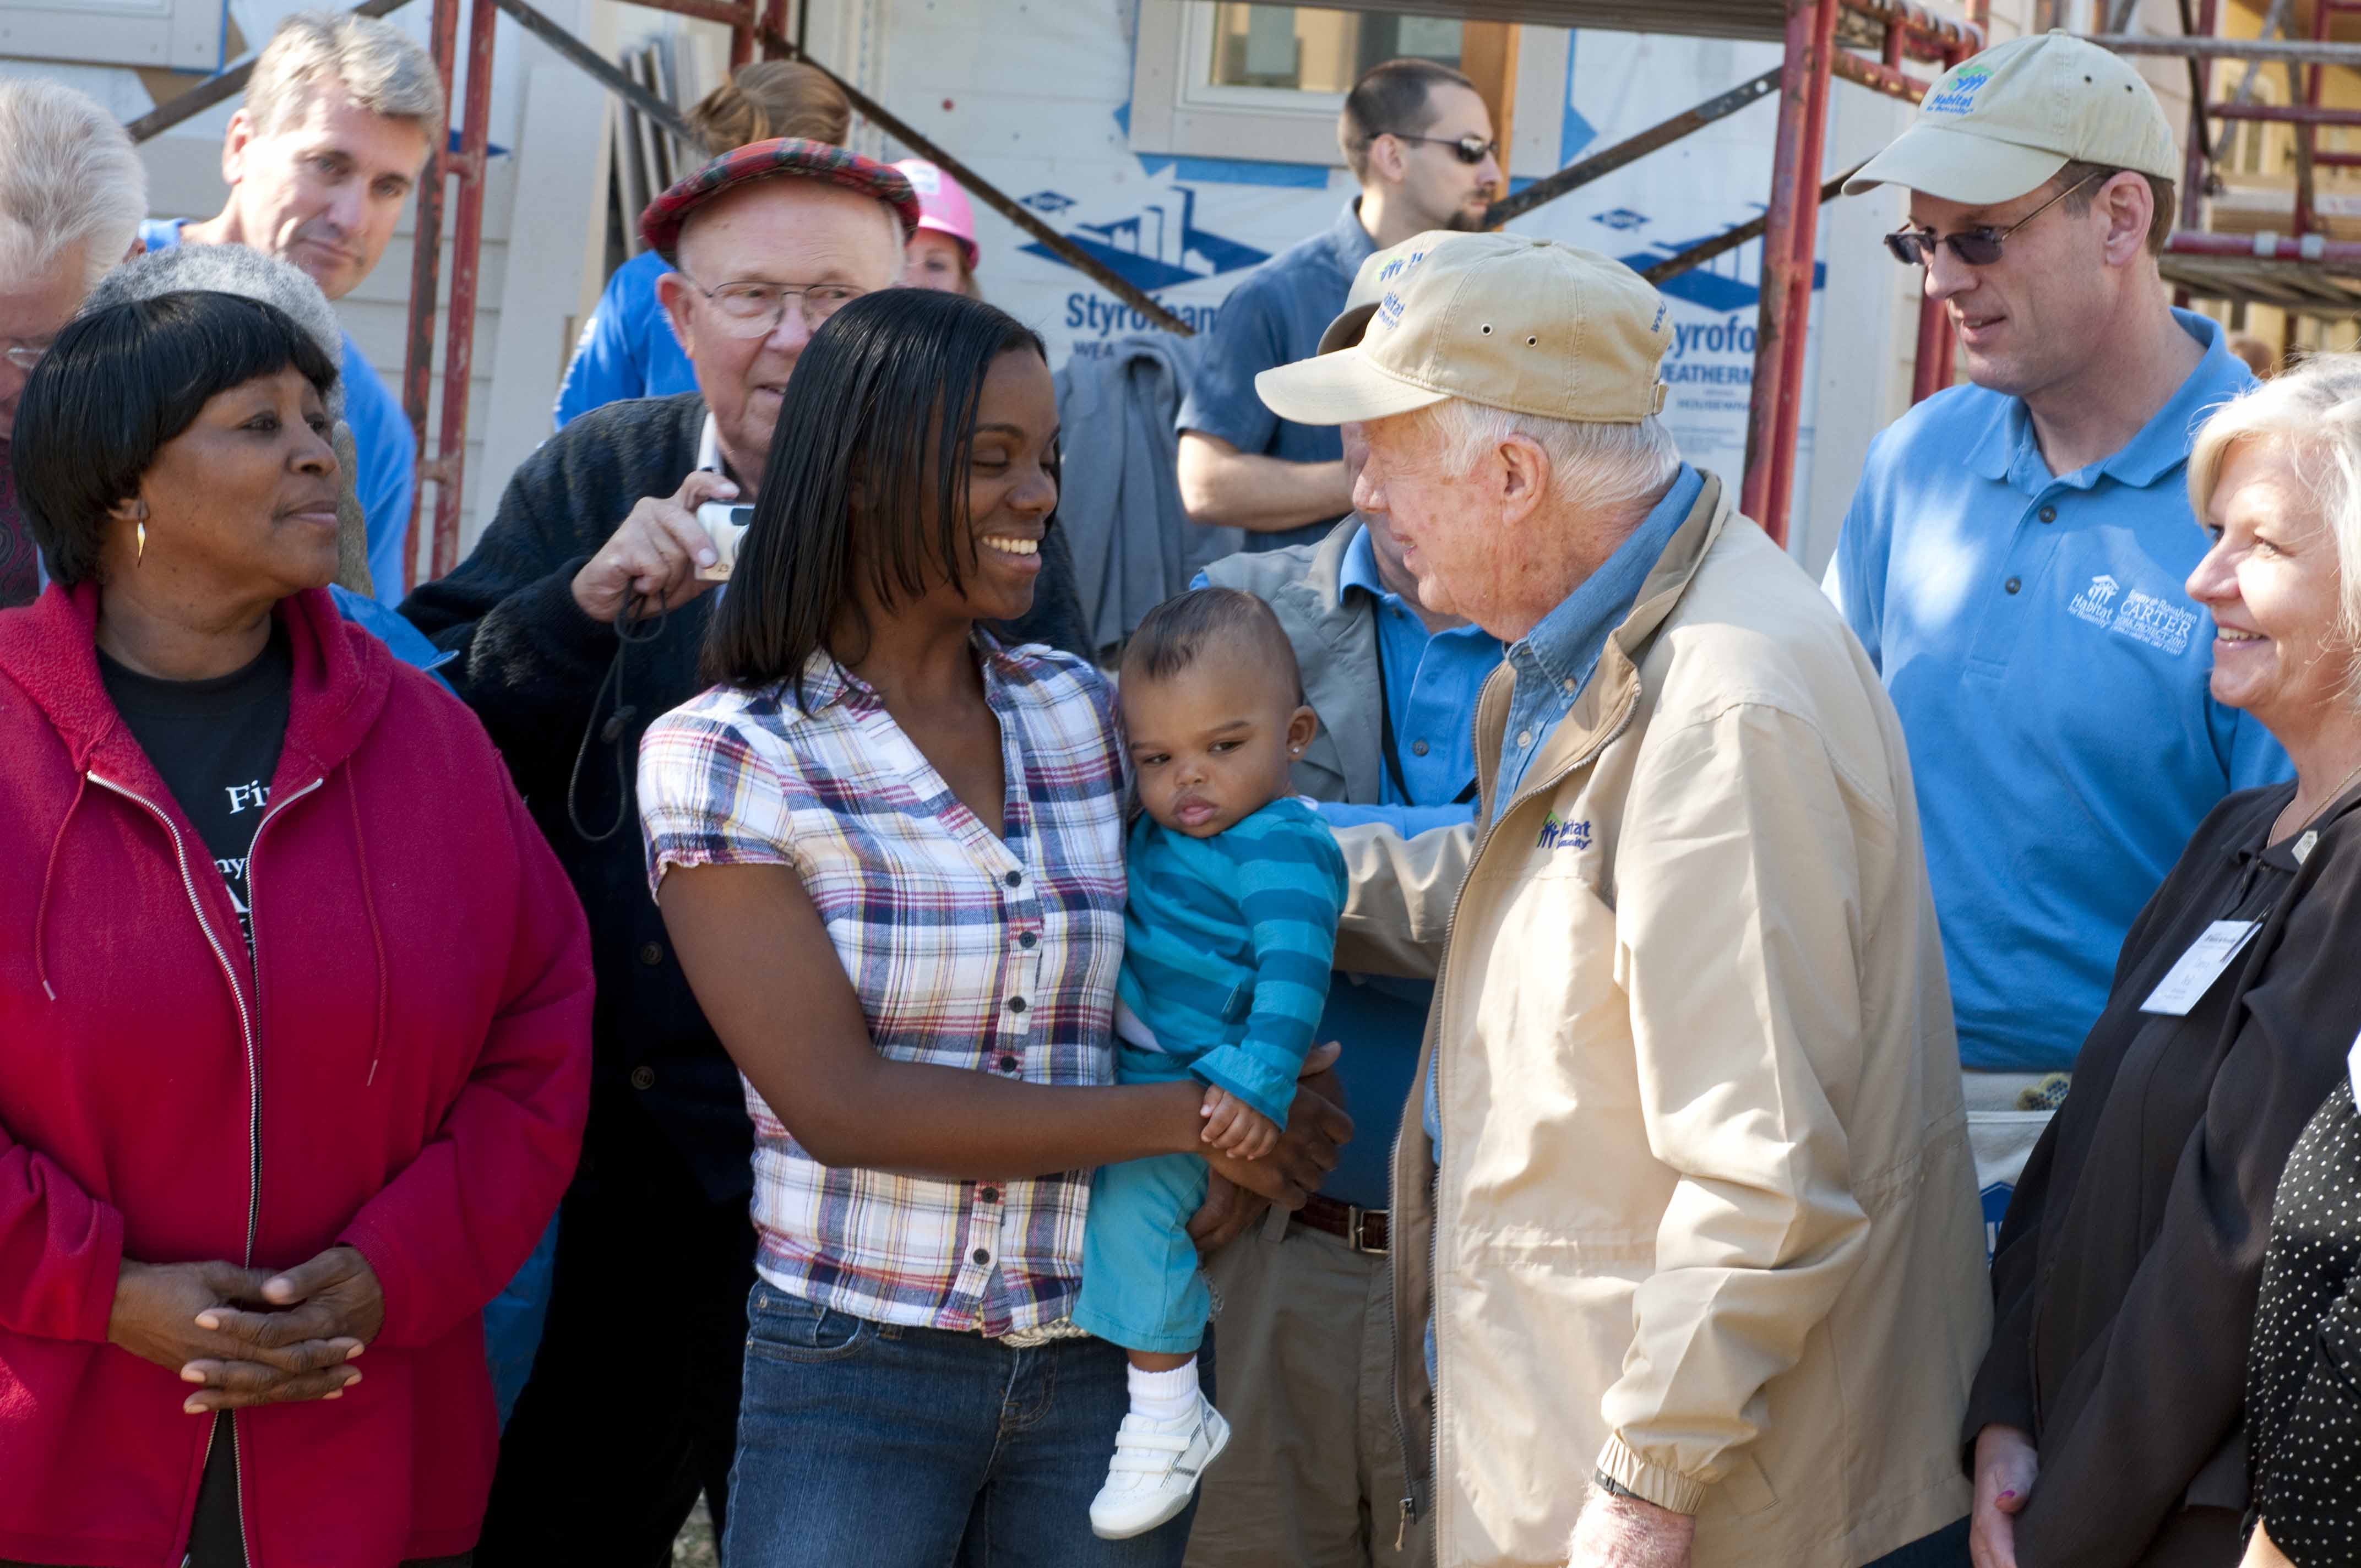 Jimmy Carter, a Habitat homeowner, and others stand and smile in a group